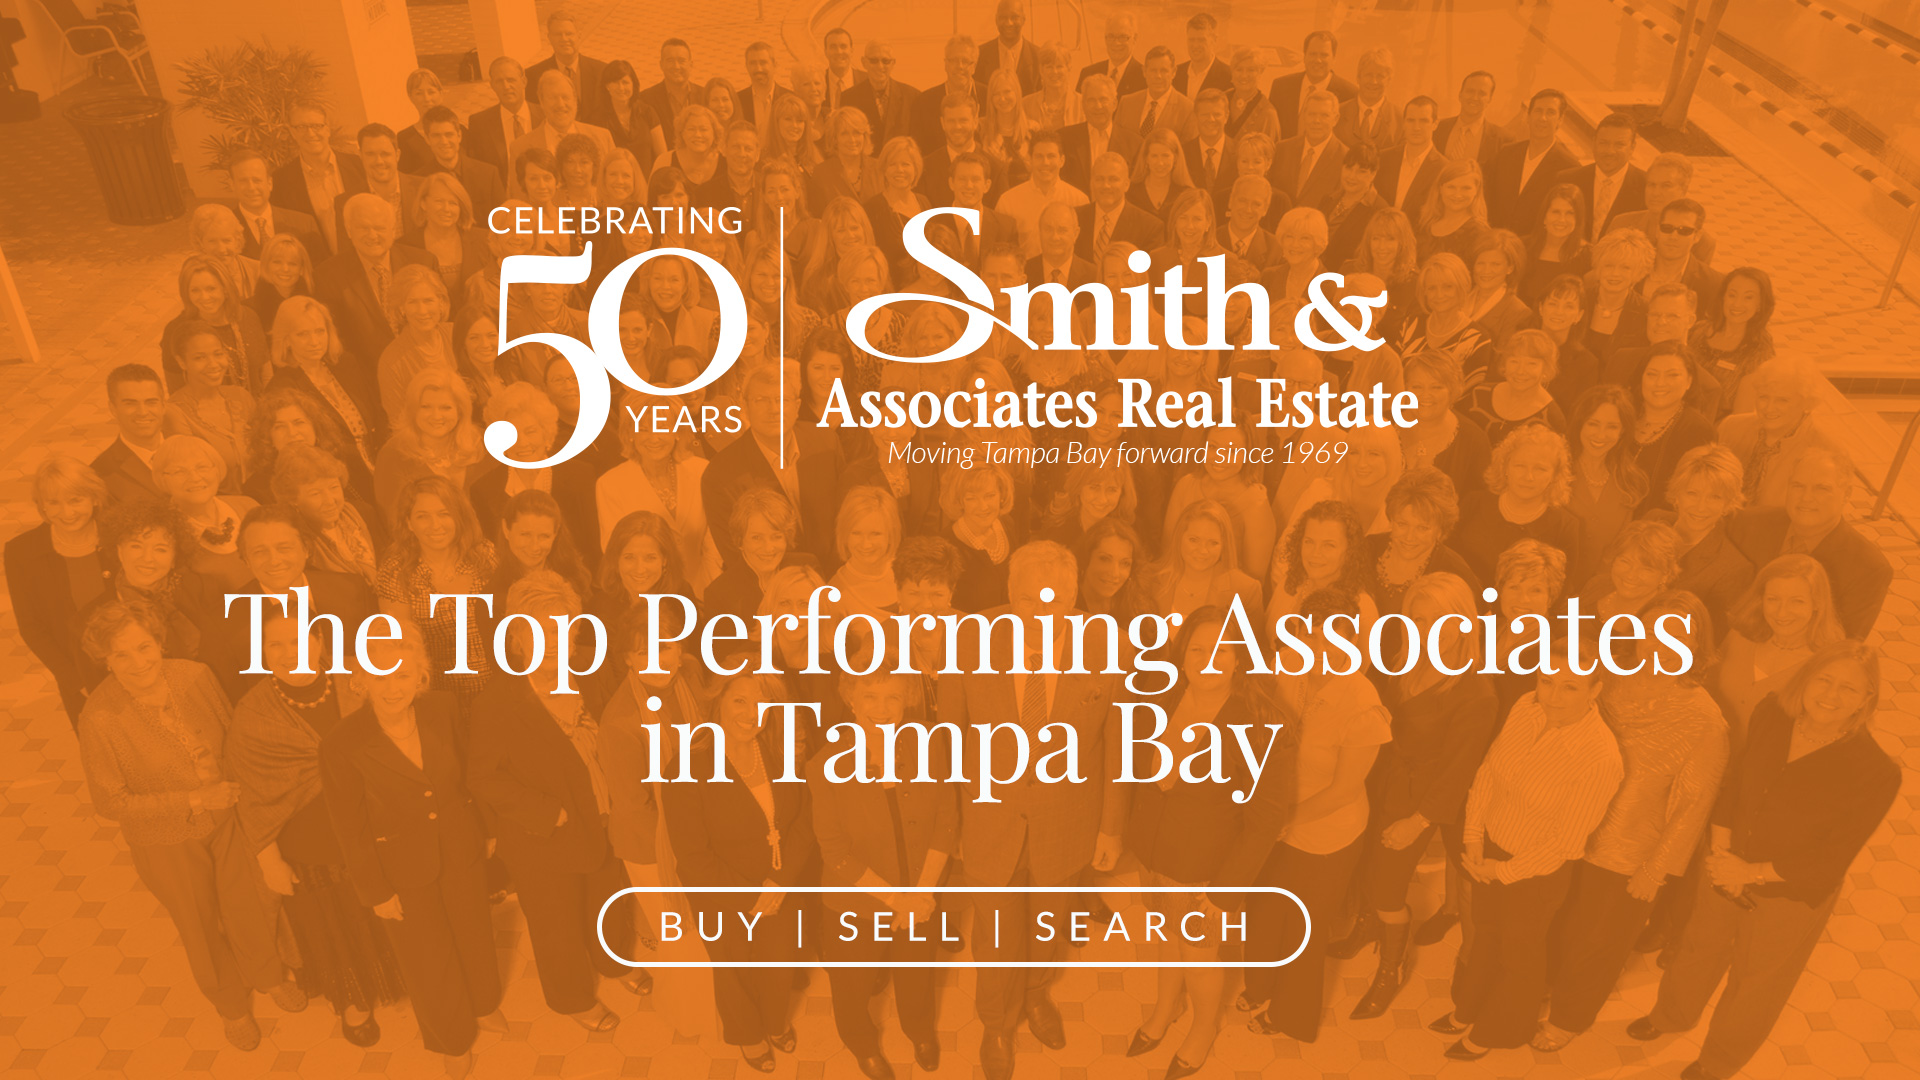 Image of Smith and Associates Real Estate ad